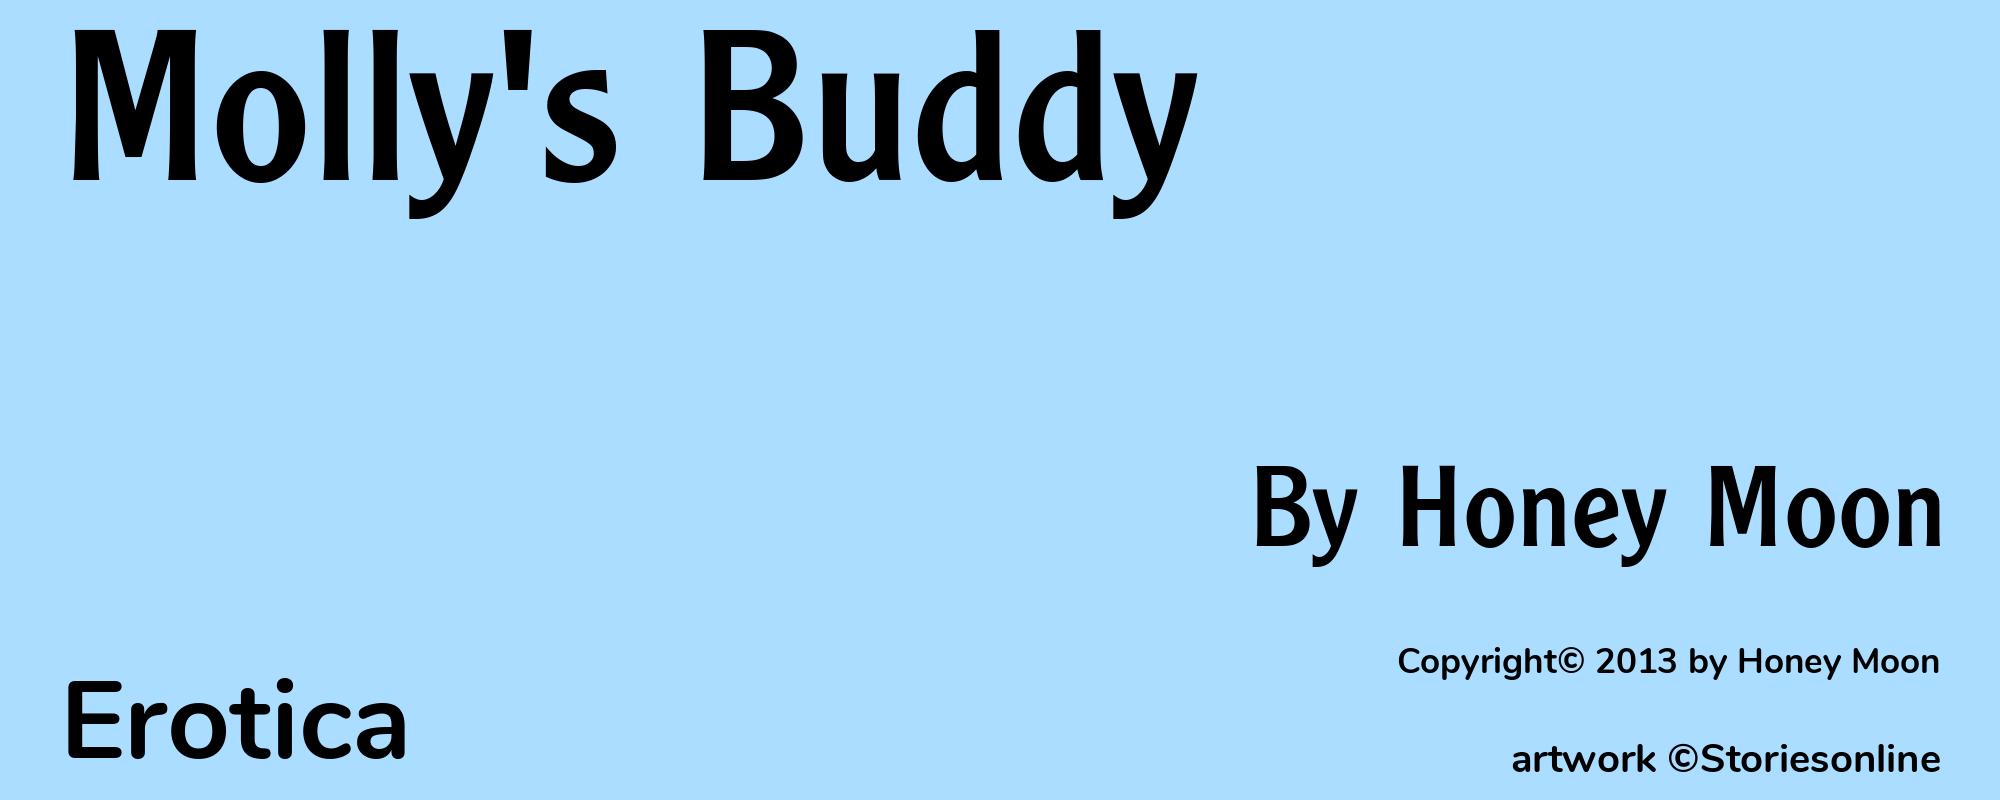 Molly's Buddy - Cover